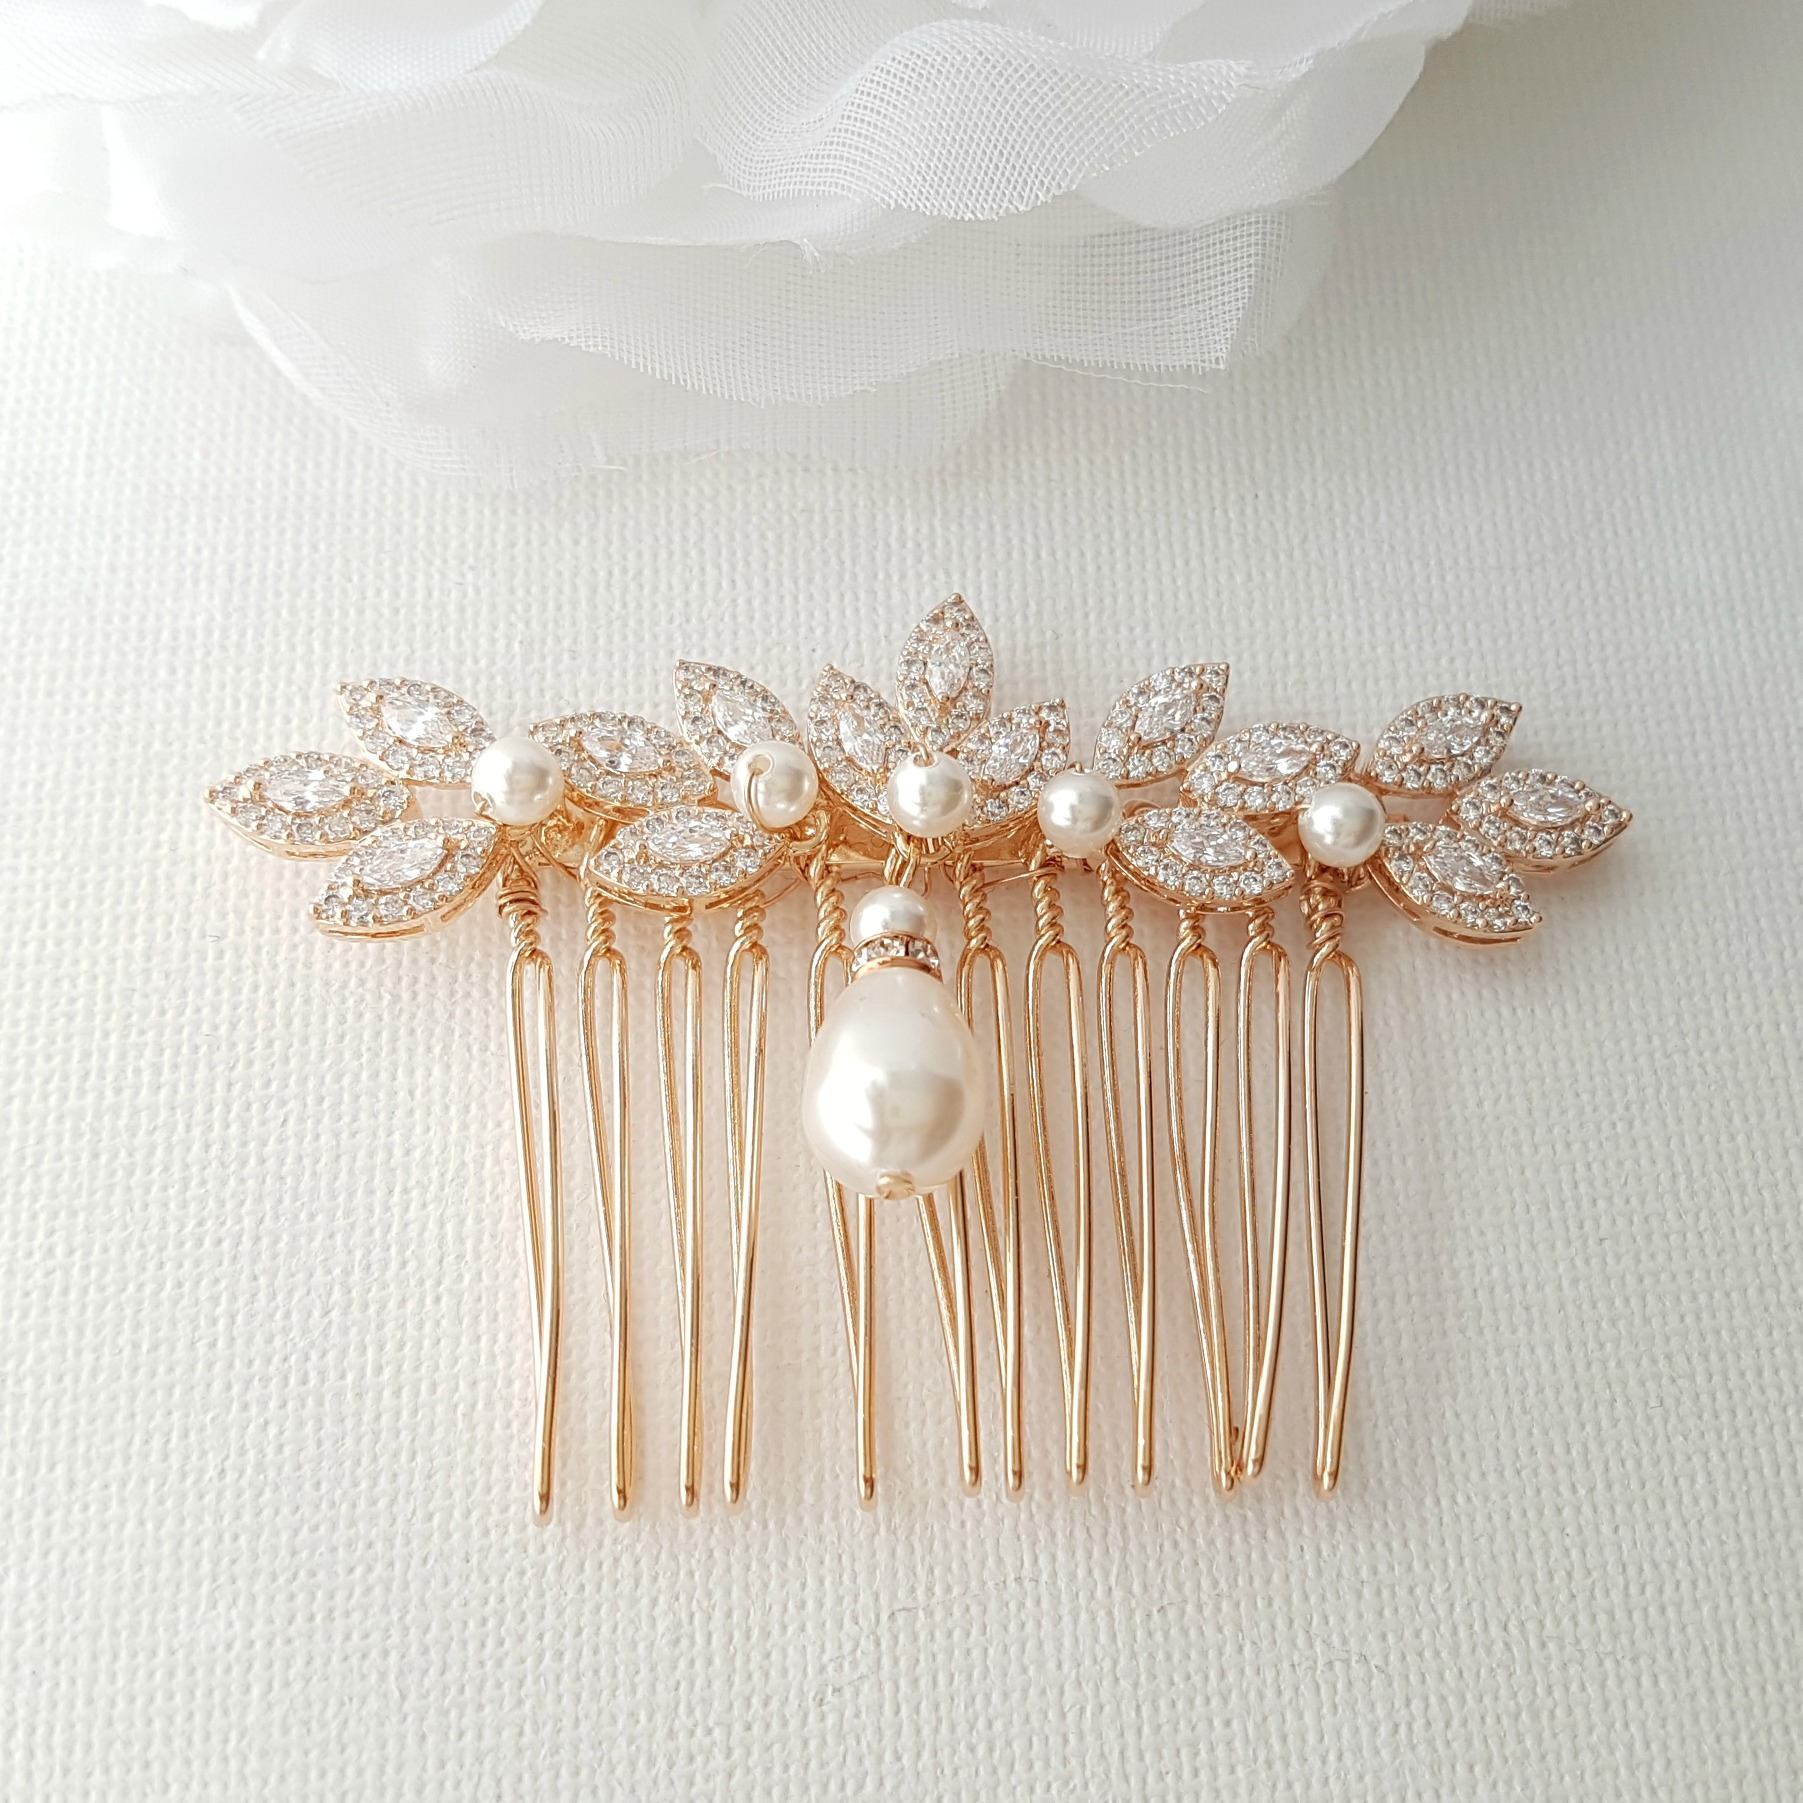 Gold Bridal Comb, Pearl Hair Comb, Rose Gold Wedding Hair Comb, Leaf Hairpiece, Crystal Hair Comb, Bridal Accessories, Abby - PoetryDesigns